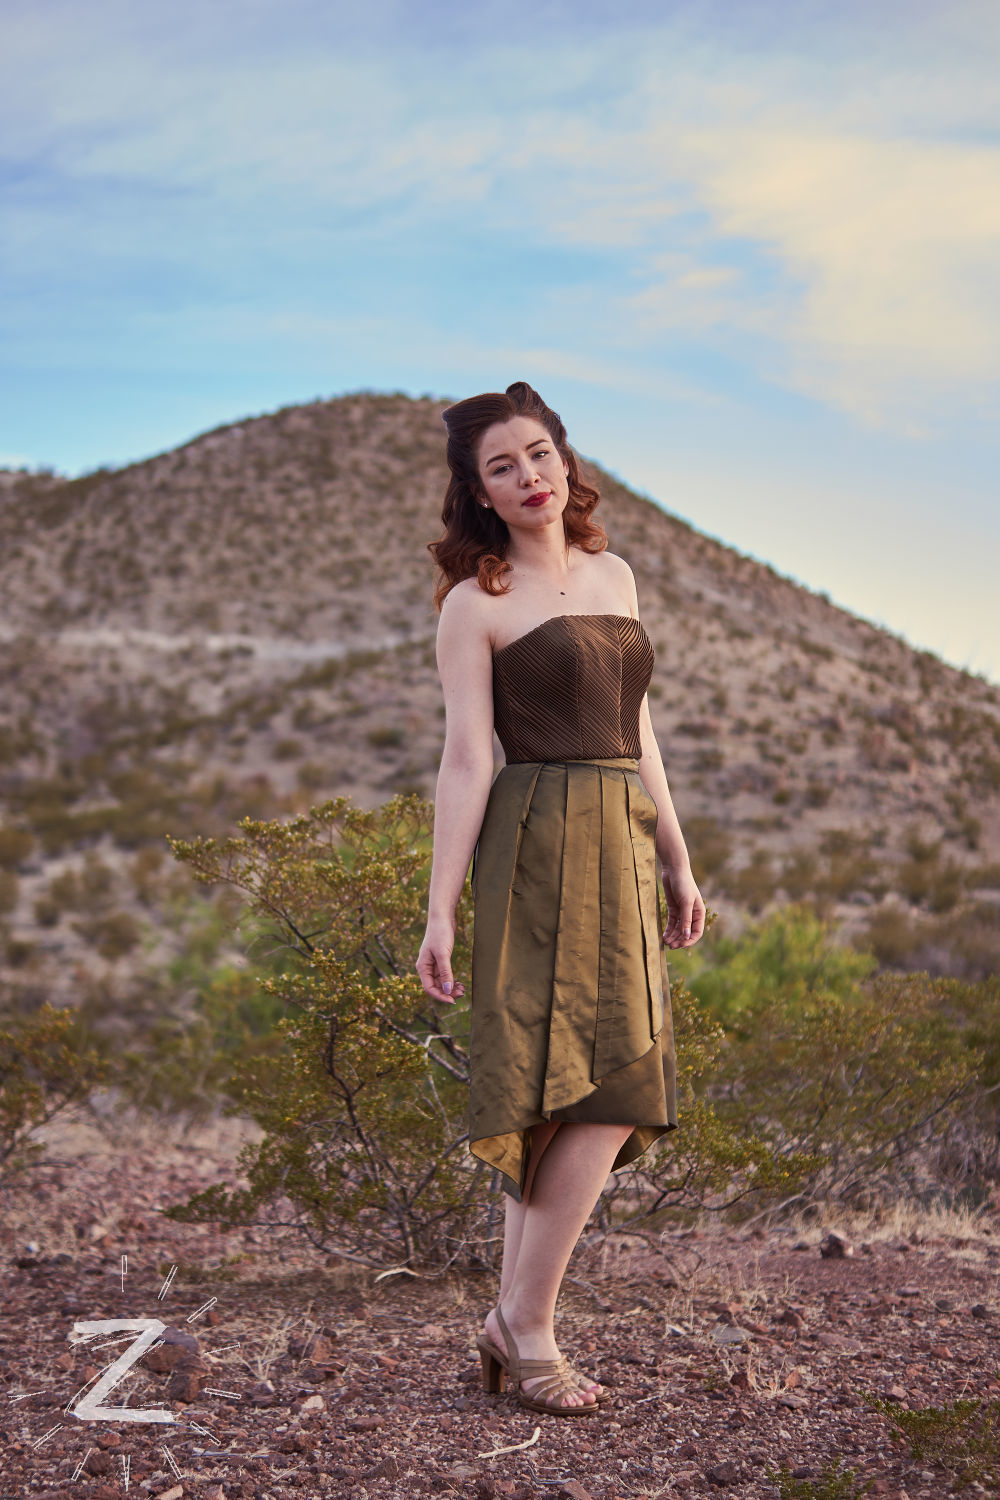 Album cover photo for the green dress inspired by Tom Lea's 'Rio Grande' painting